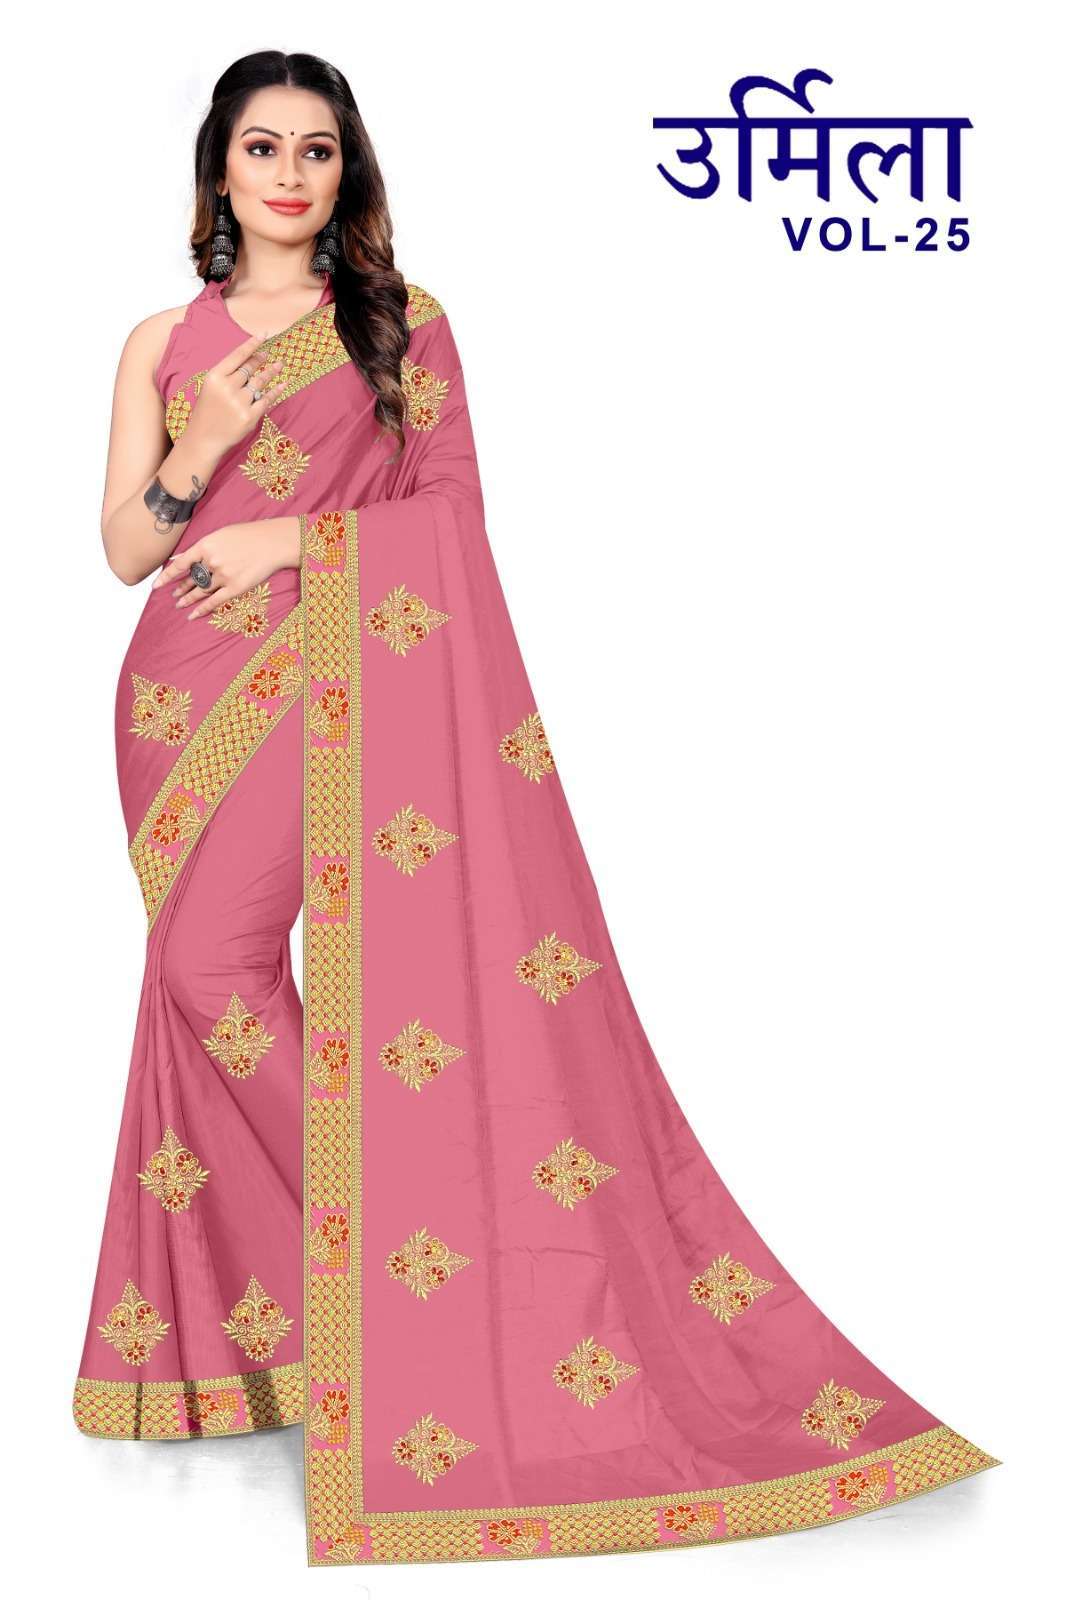 Best Chiffon Sarees for Women in India - The Economic Times